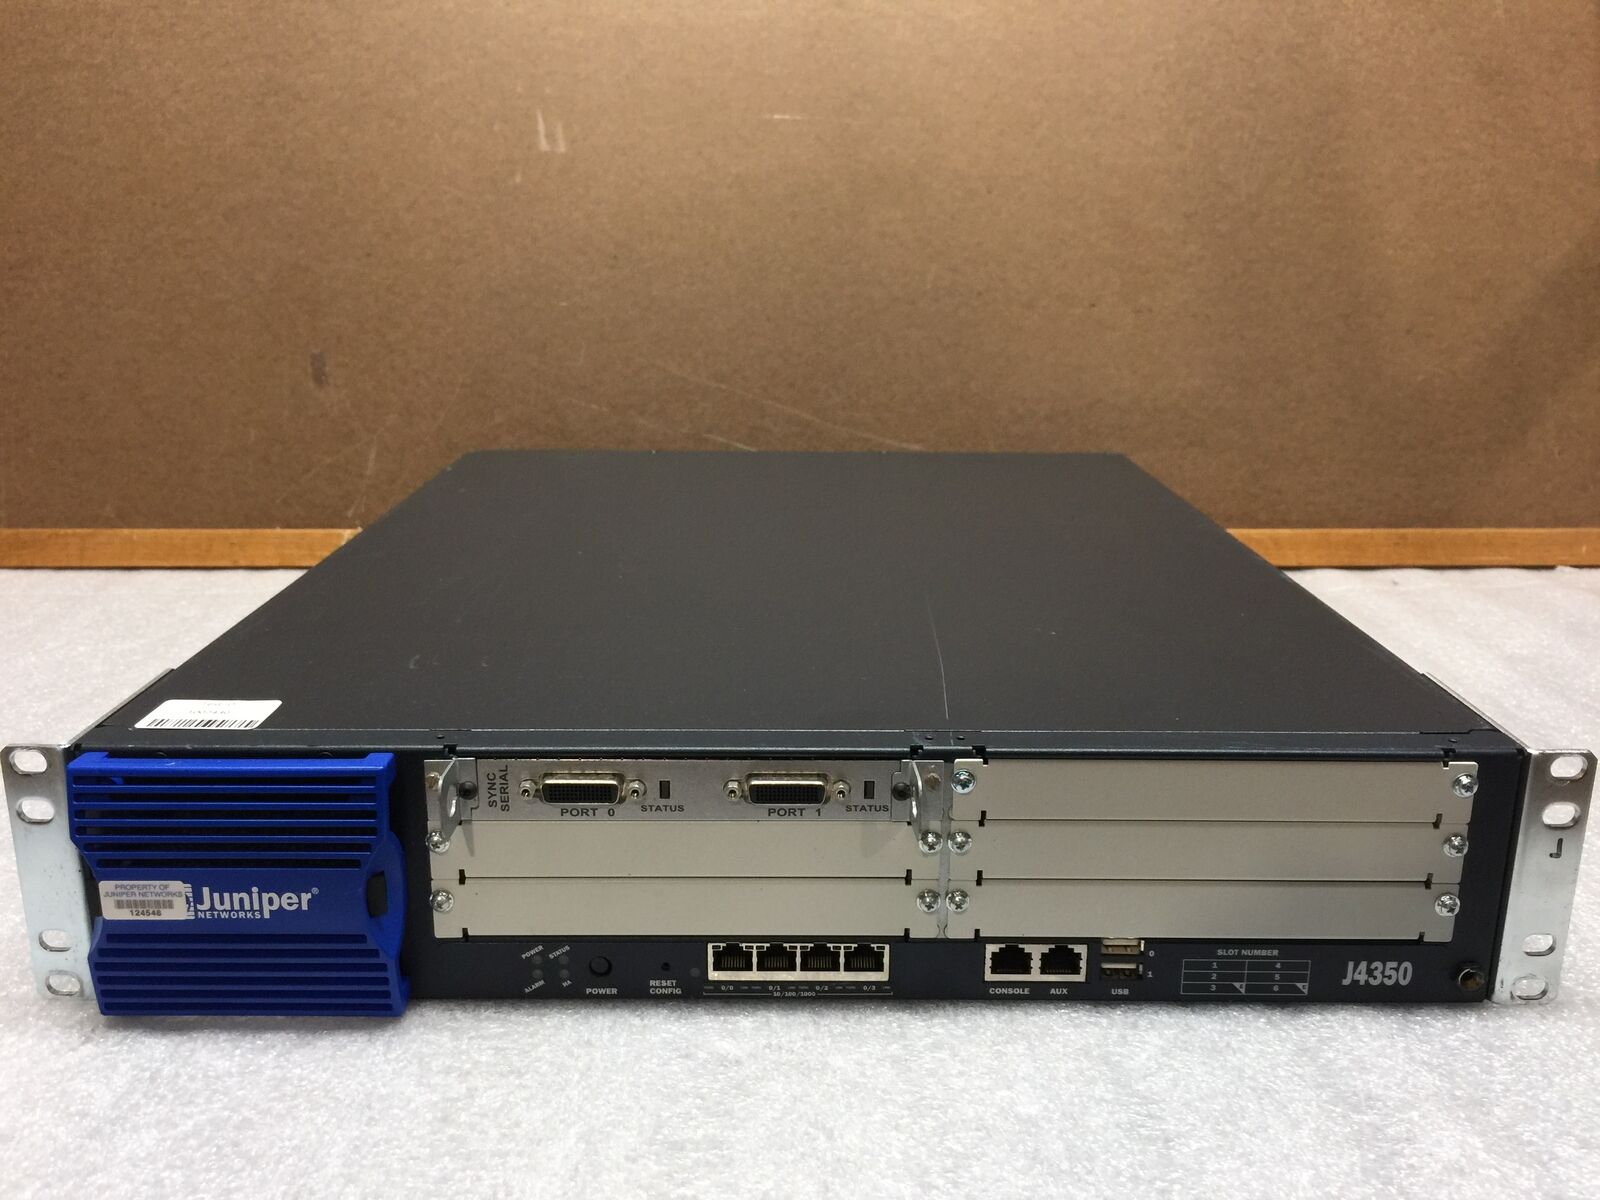 JUNIPER Networks J-4350 S Network Access Router J4350, Tested/Working/Reset